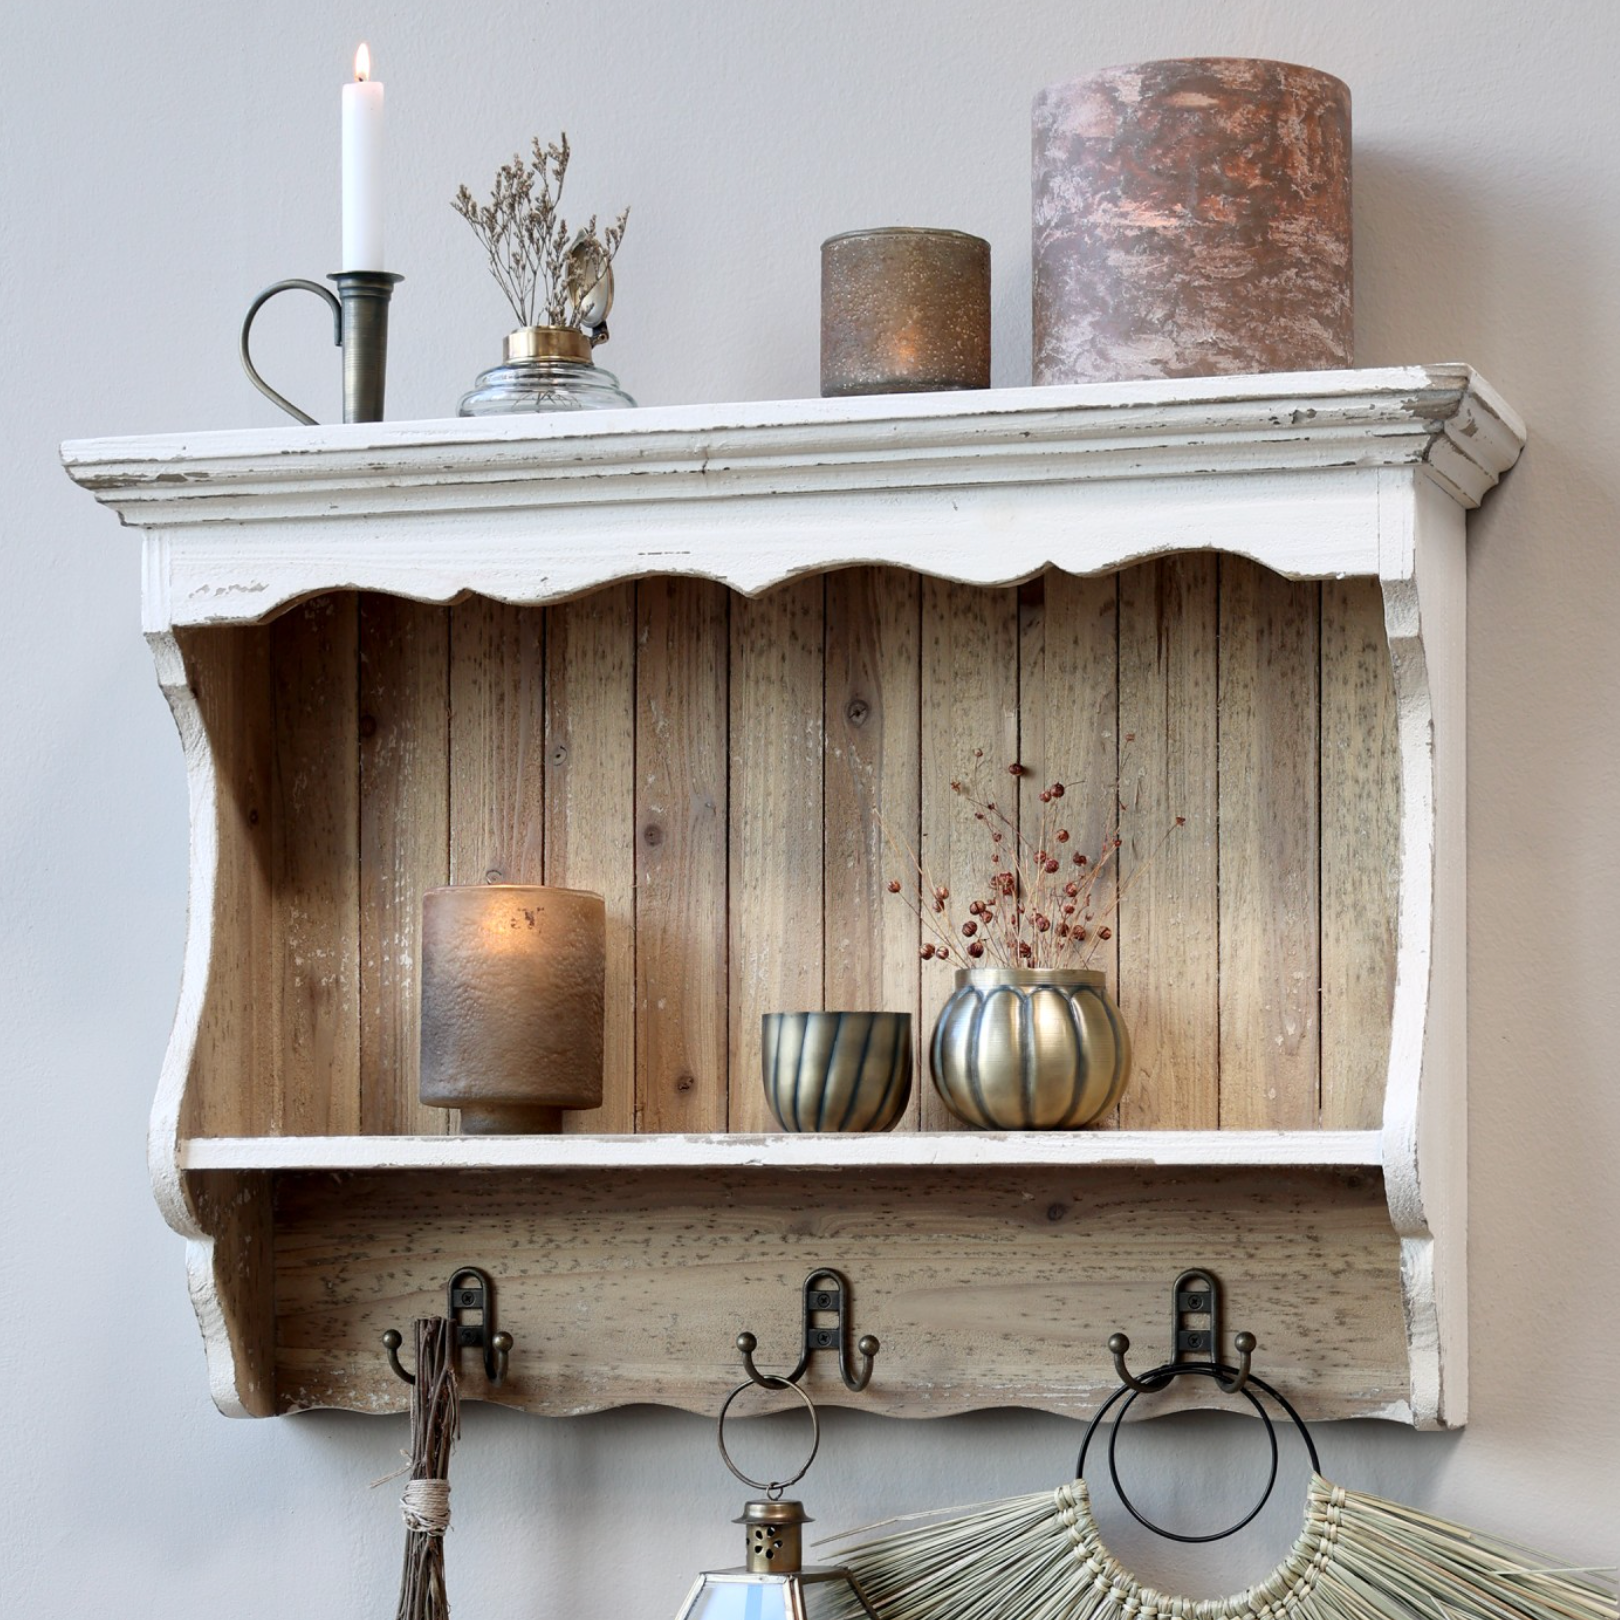 Rustic white wooden wall shelf with decor items.